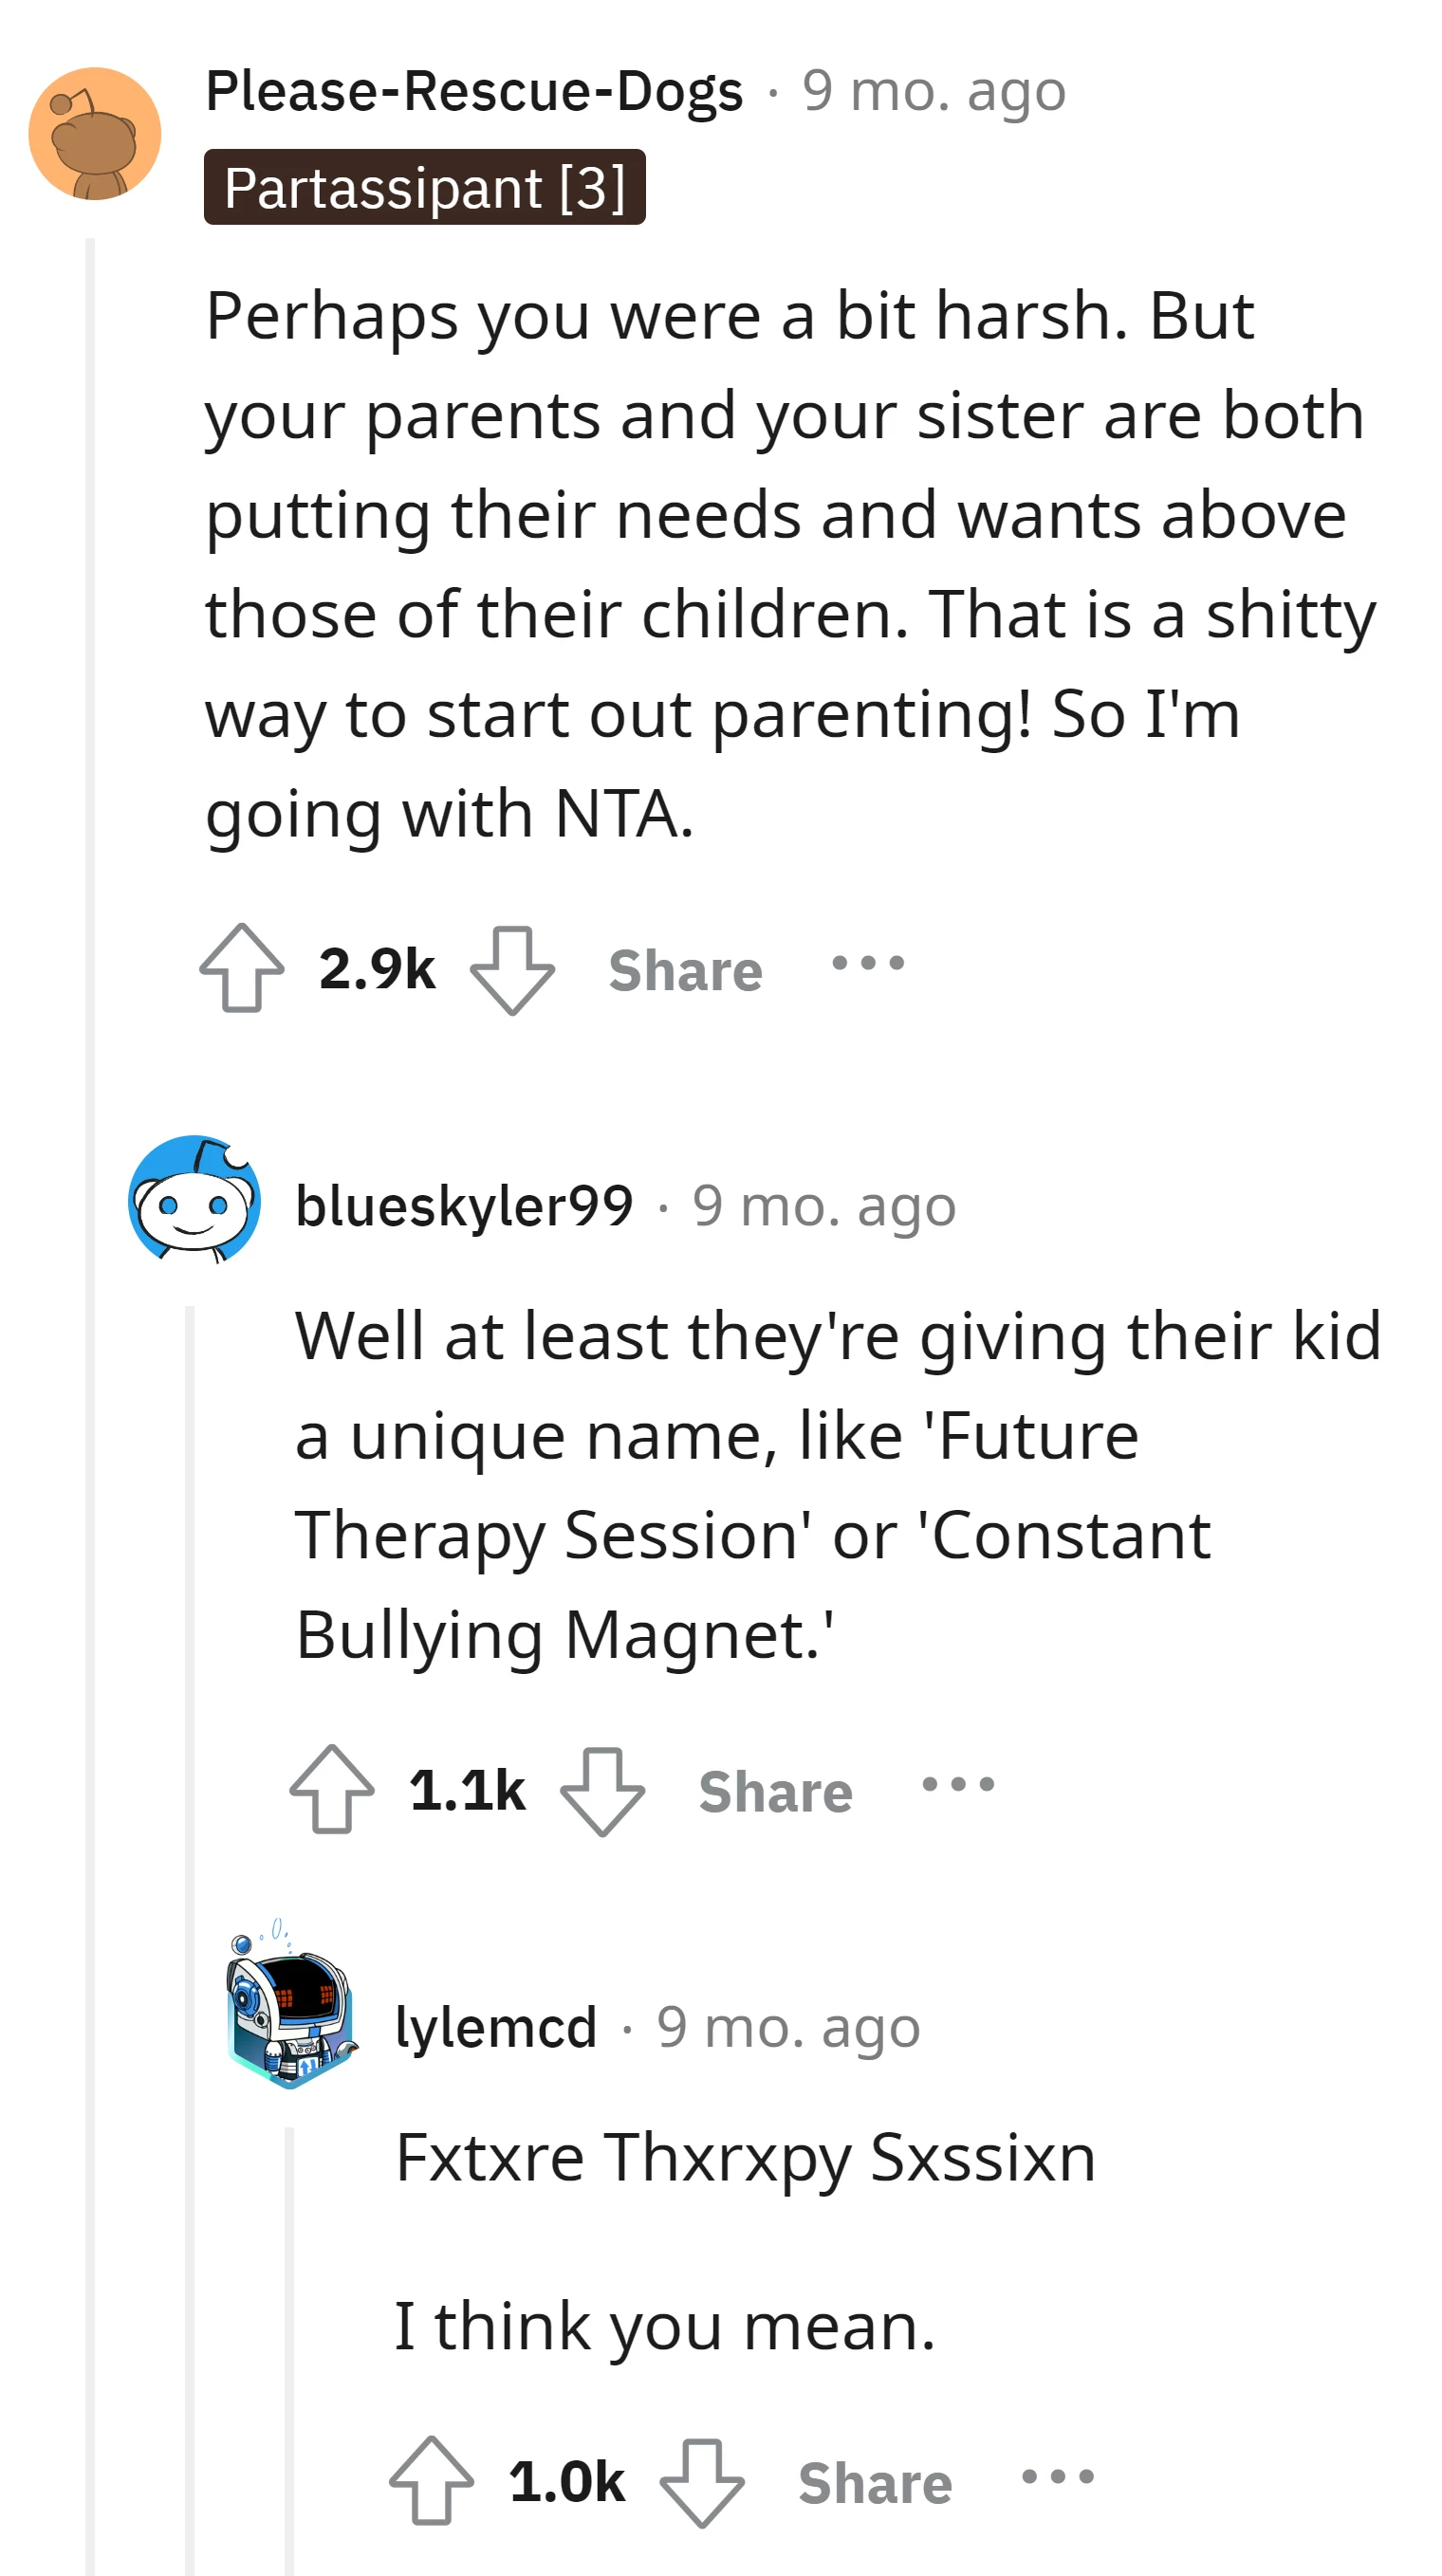 Commenters criticize the parents for prioritizing their needs over their children'